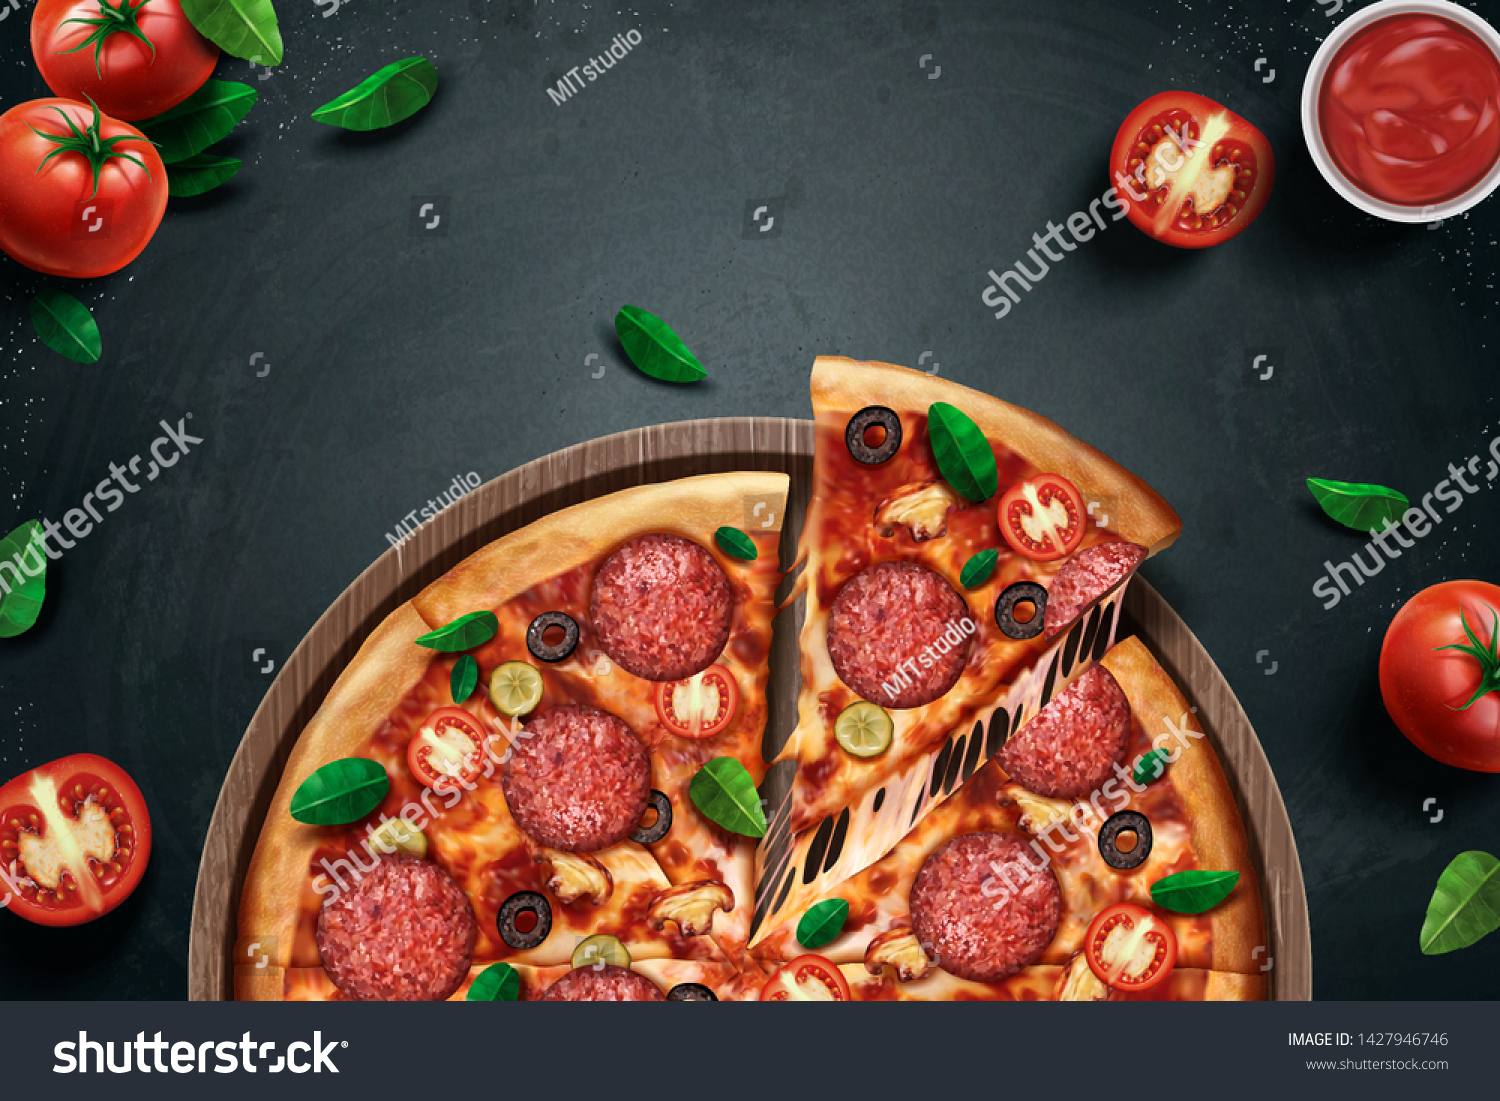 Pepperoni pizza ads with delicious ingredients on chalkboard background in 3d illustration #1427946746